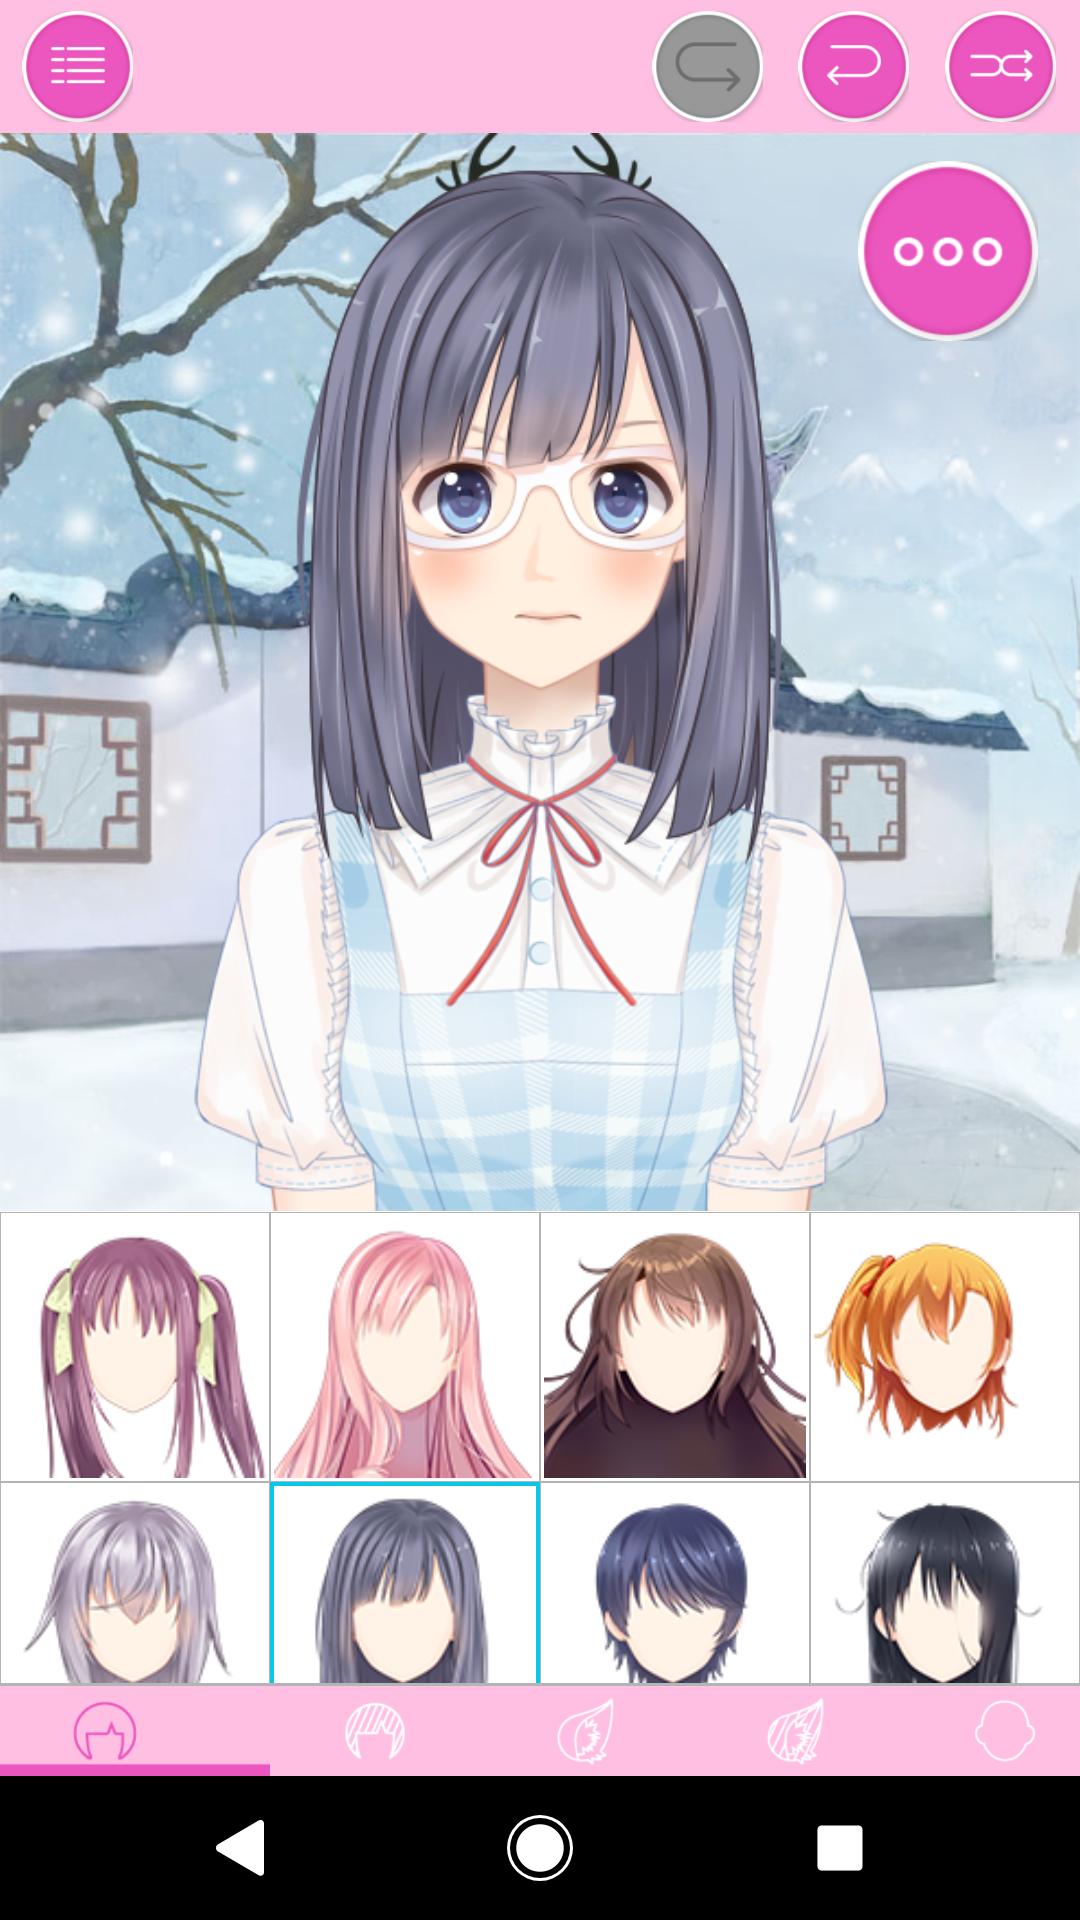 Avatar Maker: Make Your Own Avatar for Android - APK Download